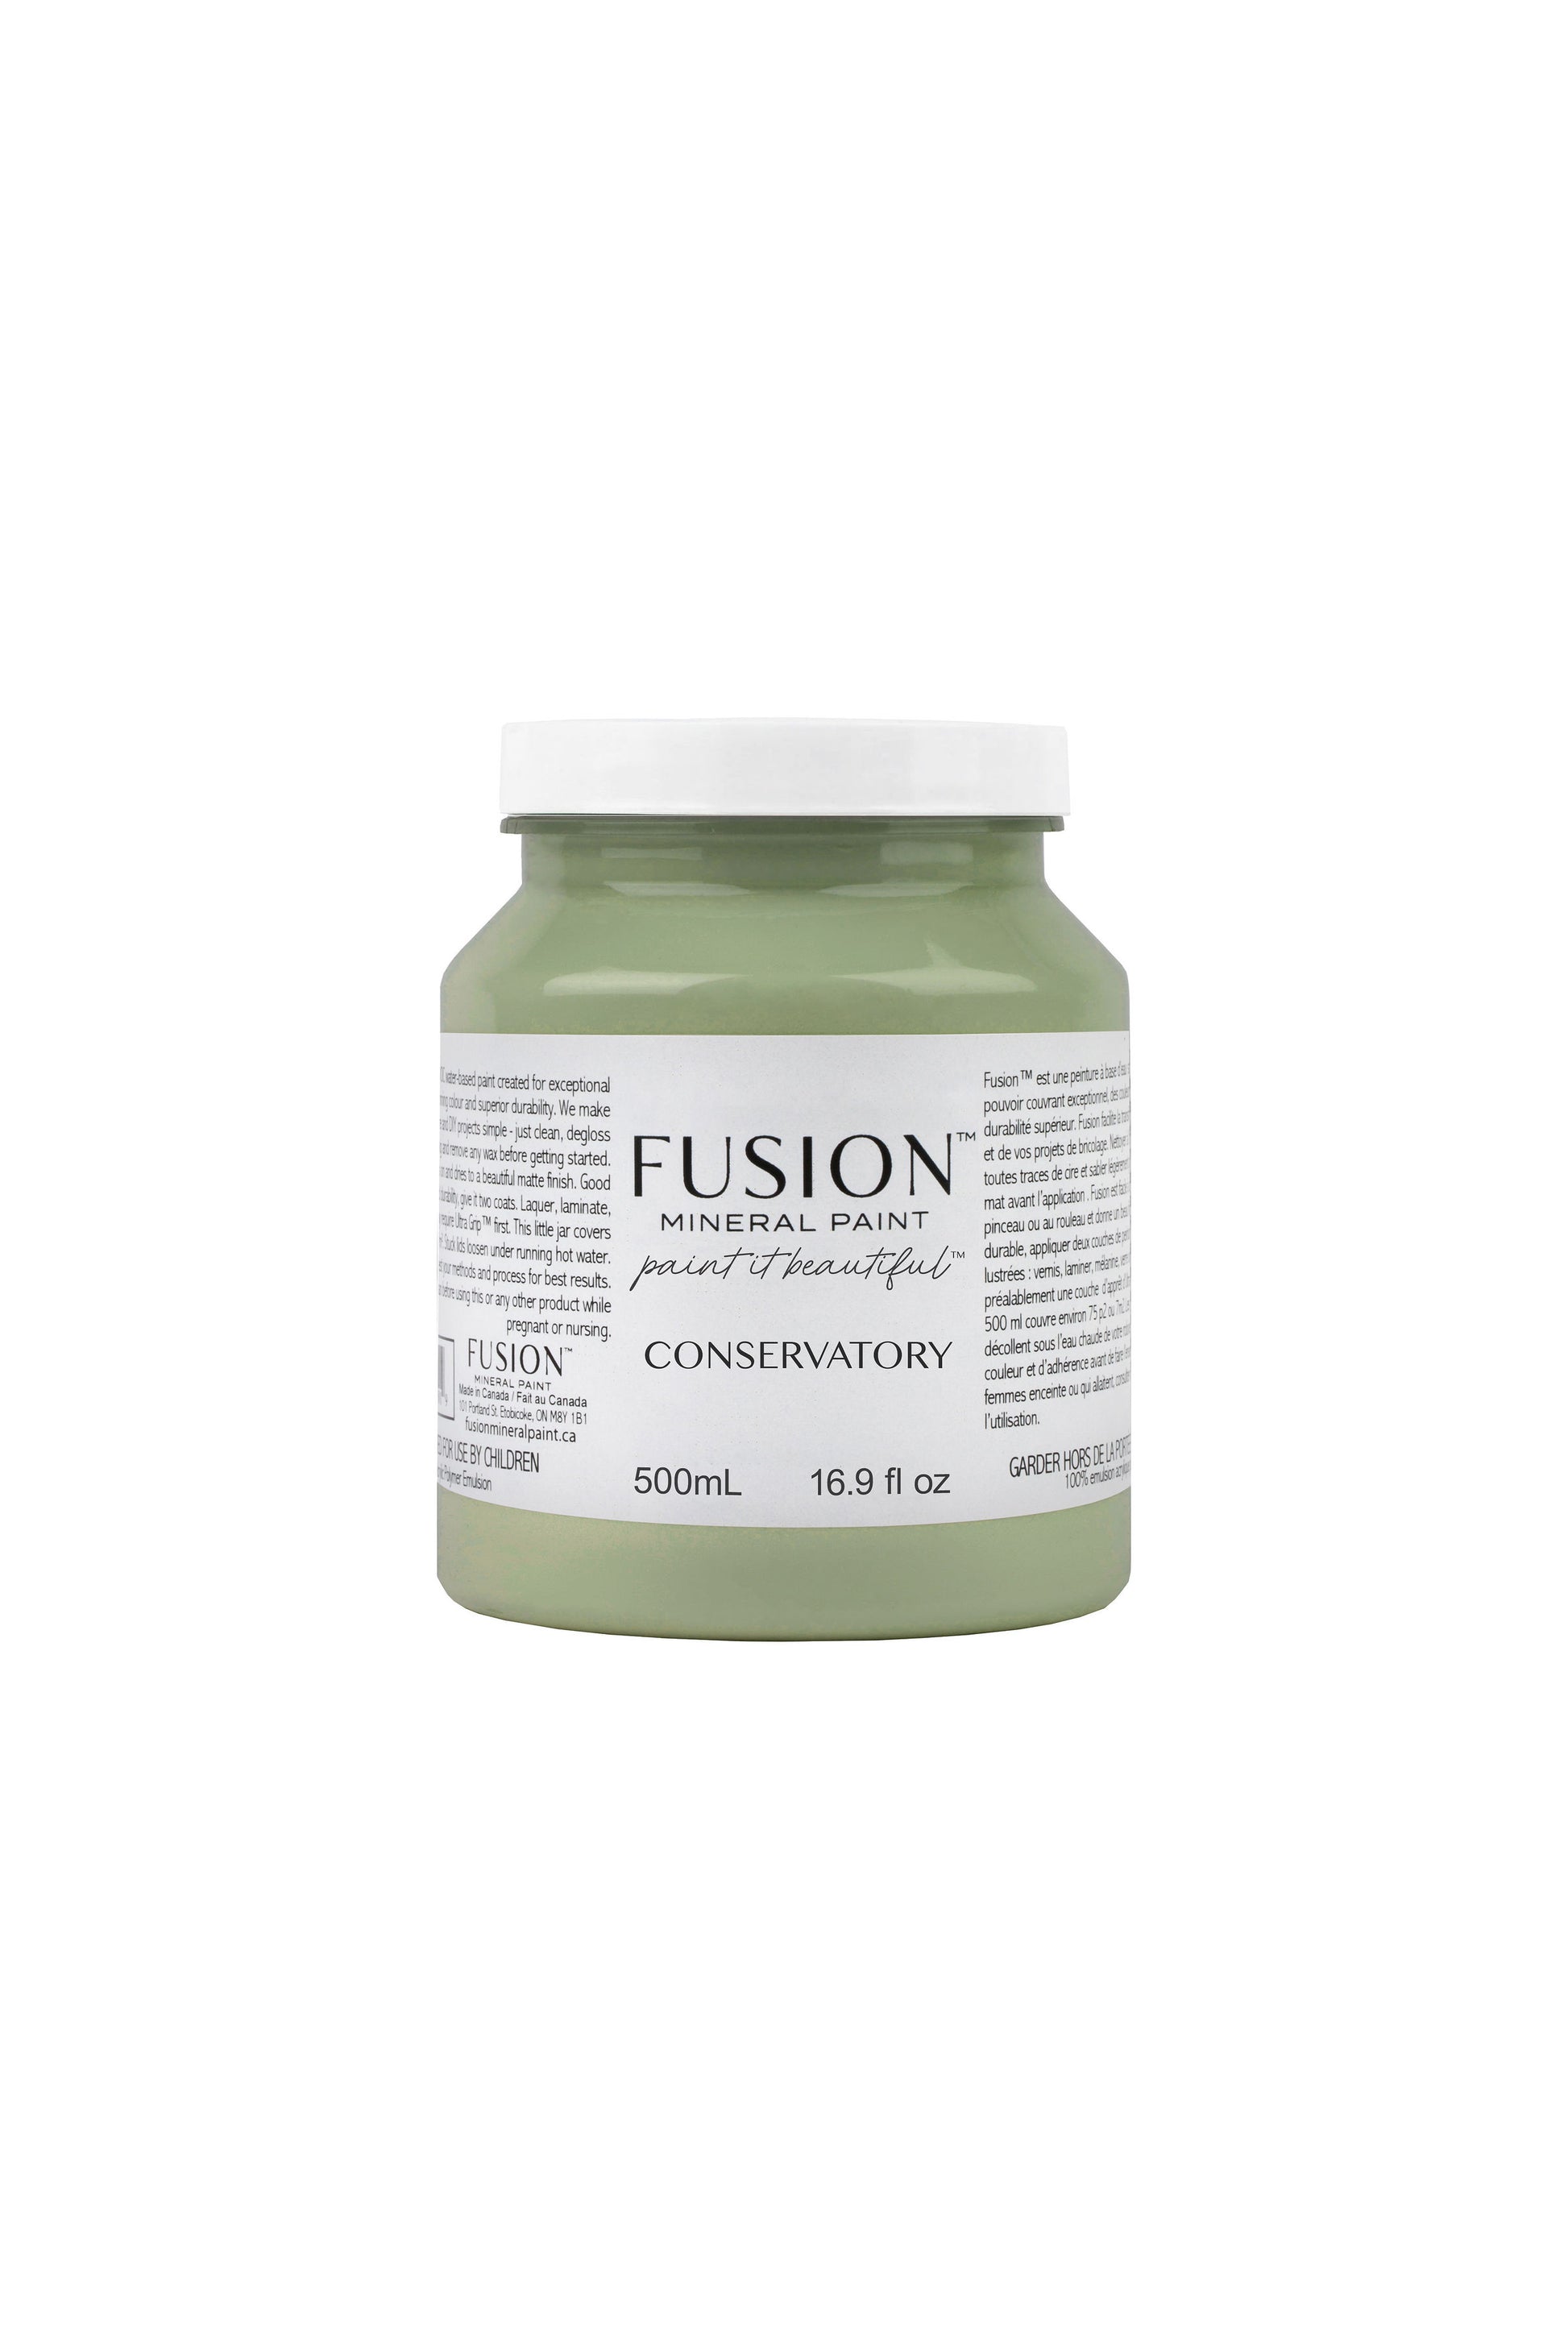 Conservatory Fusion Mineral Paint| 500ml Pint Size